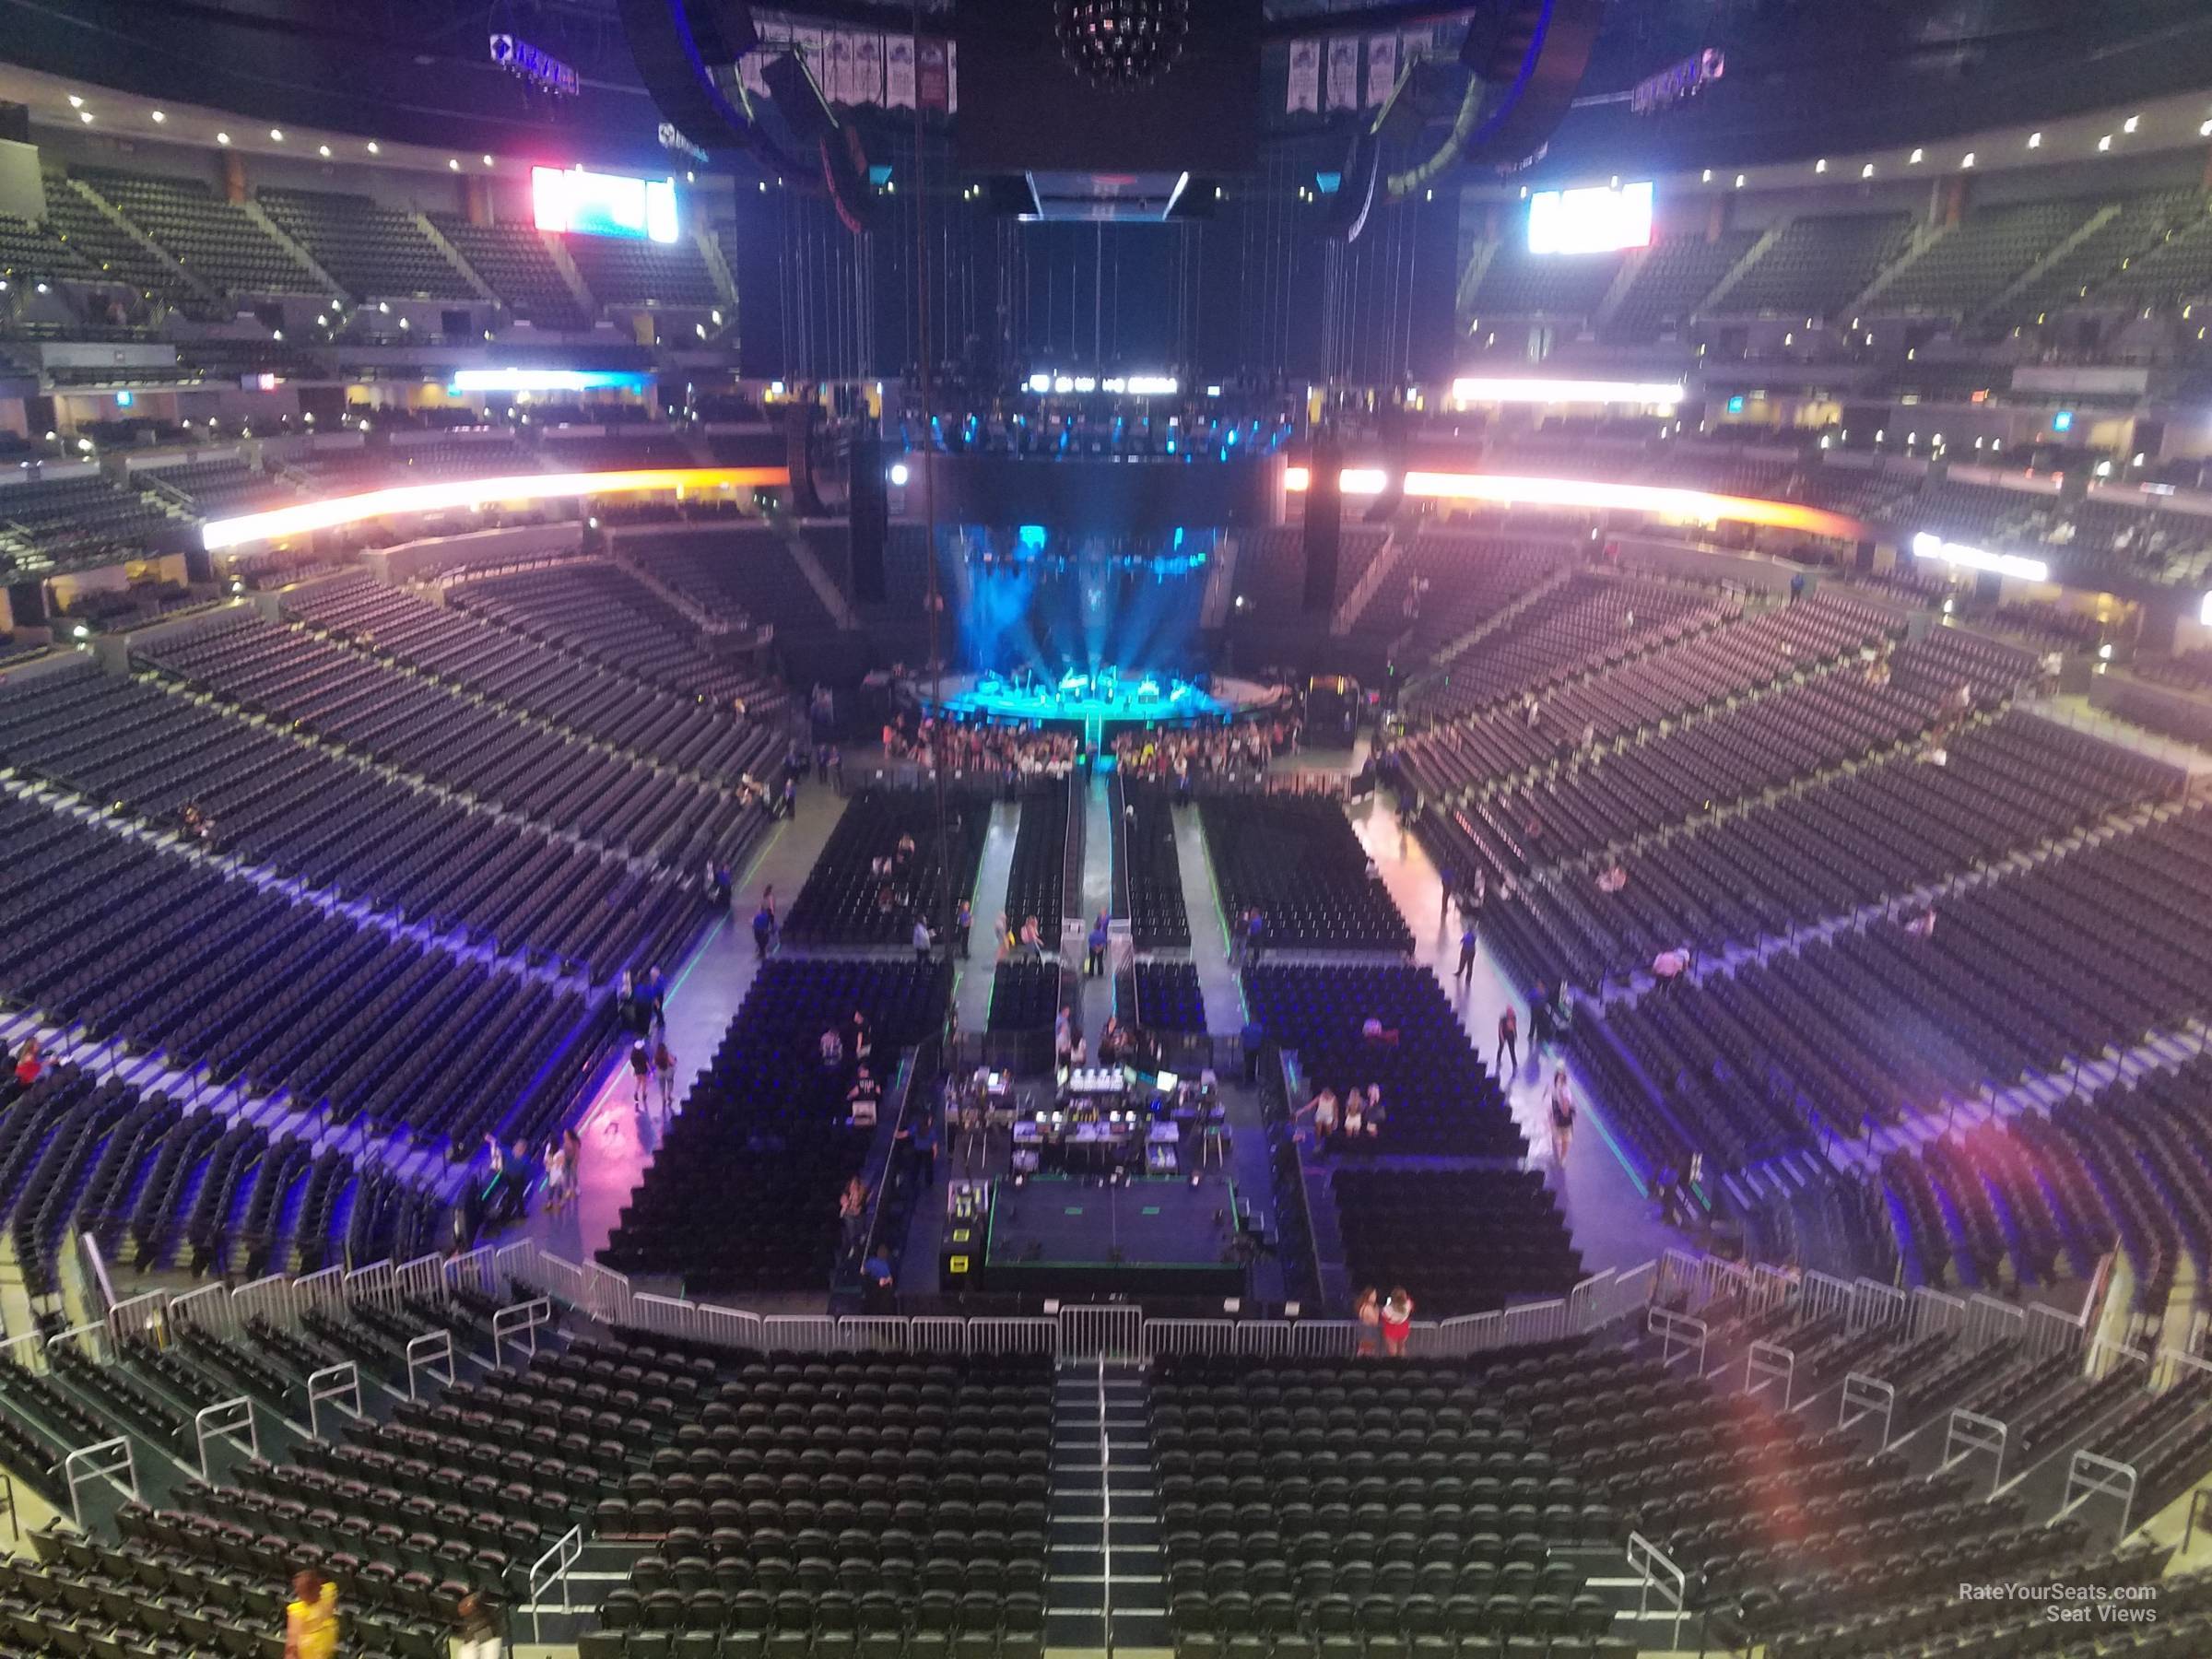 section 321, row 3 seat view  for concert - ball arena